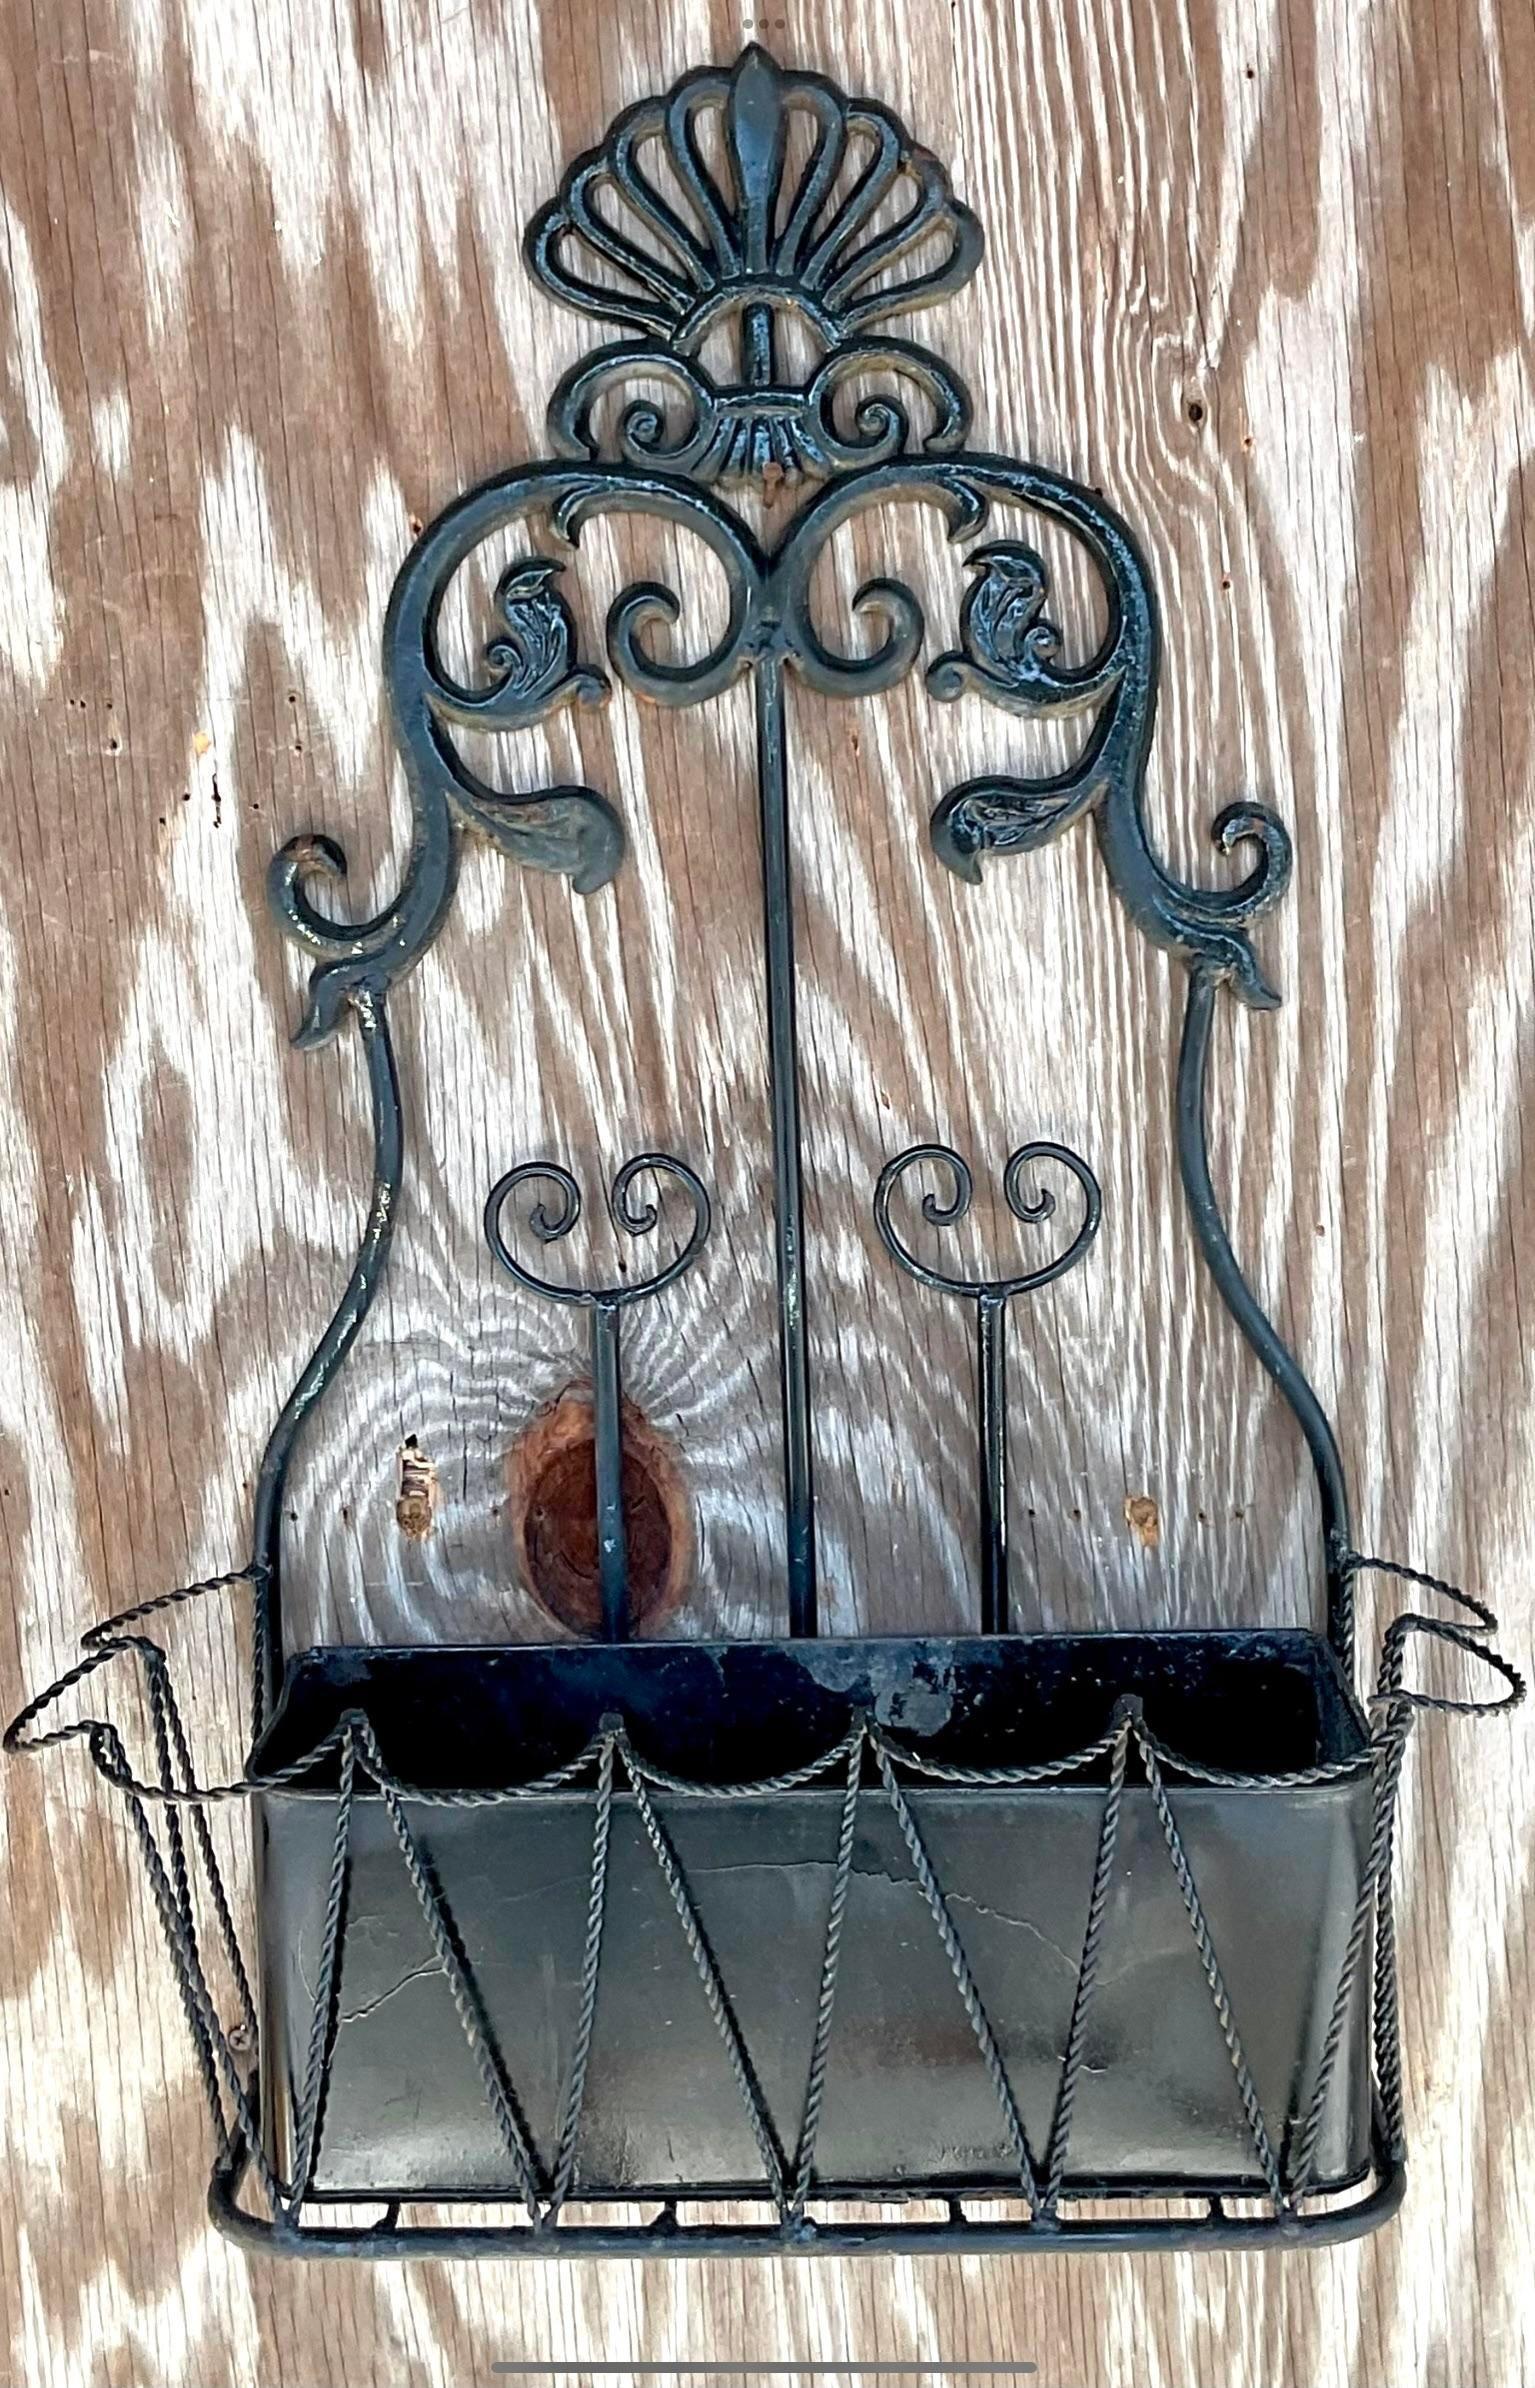 American Vintage Boho Wrought Iron Hanging Wall Planter For Sale